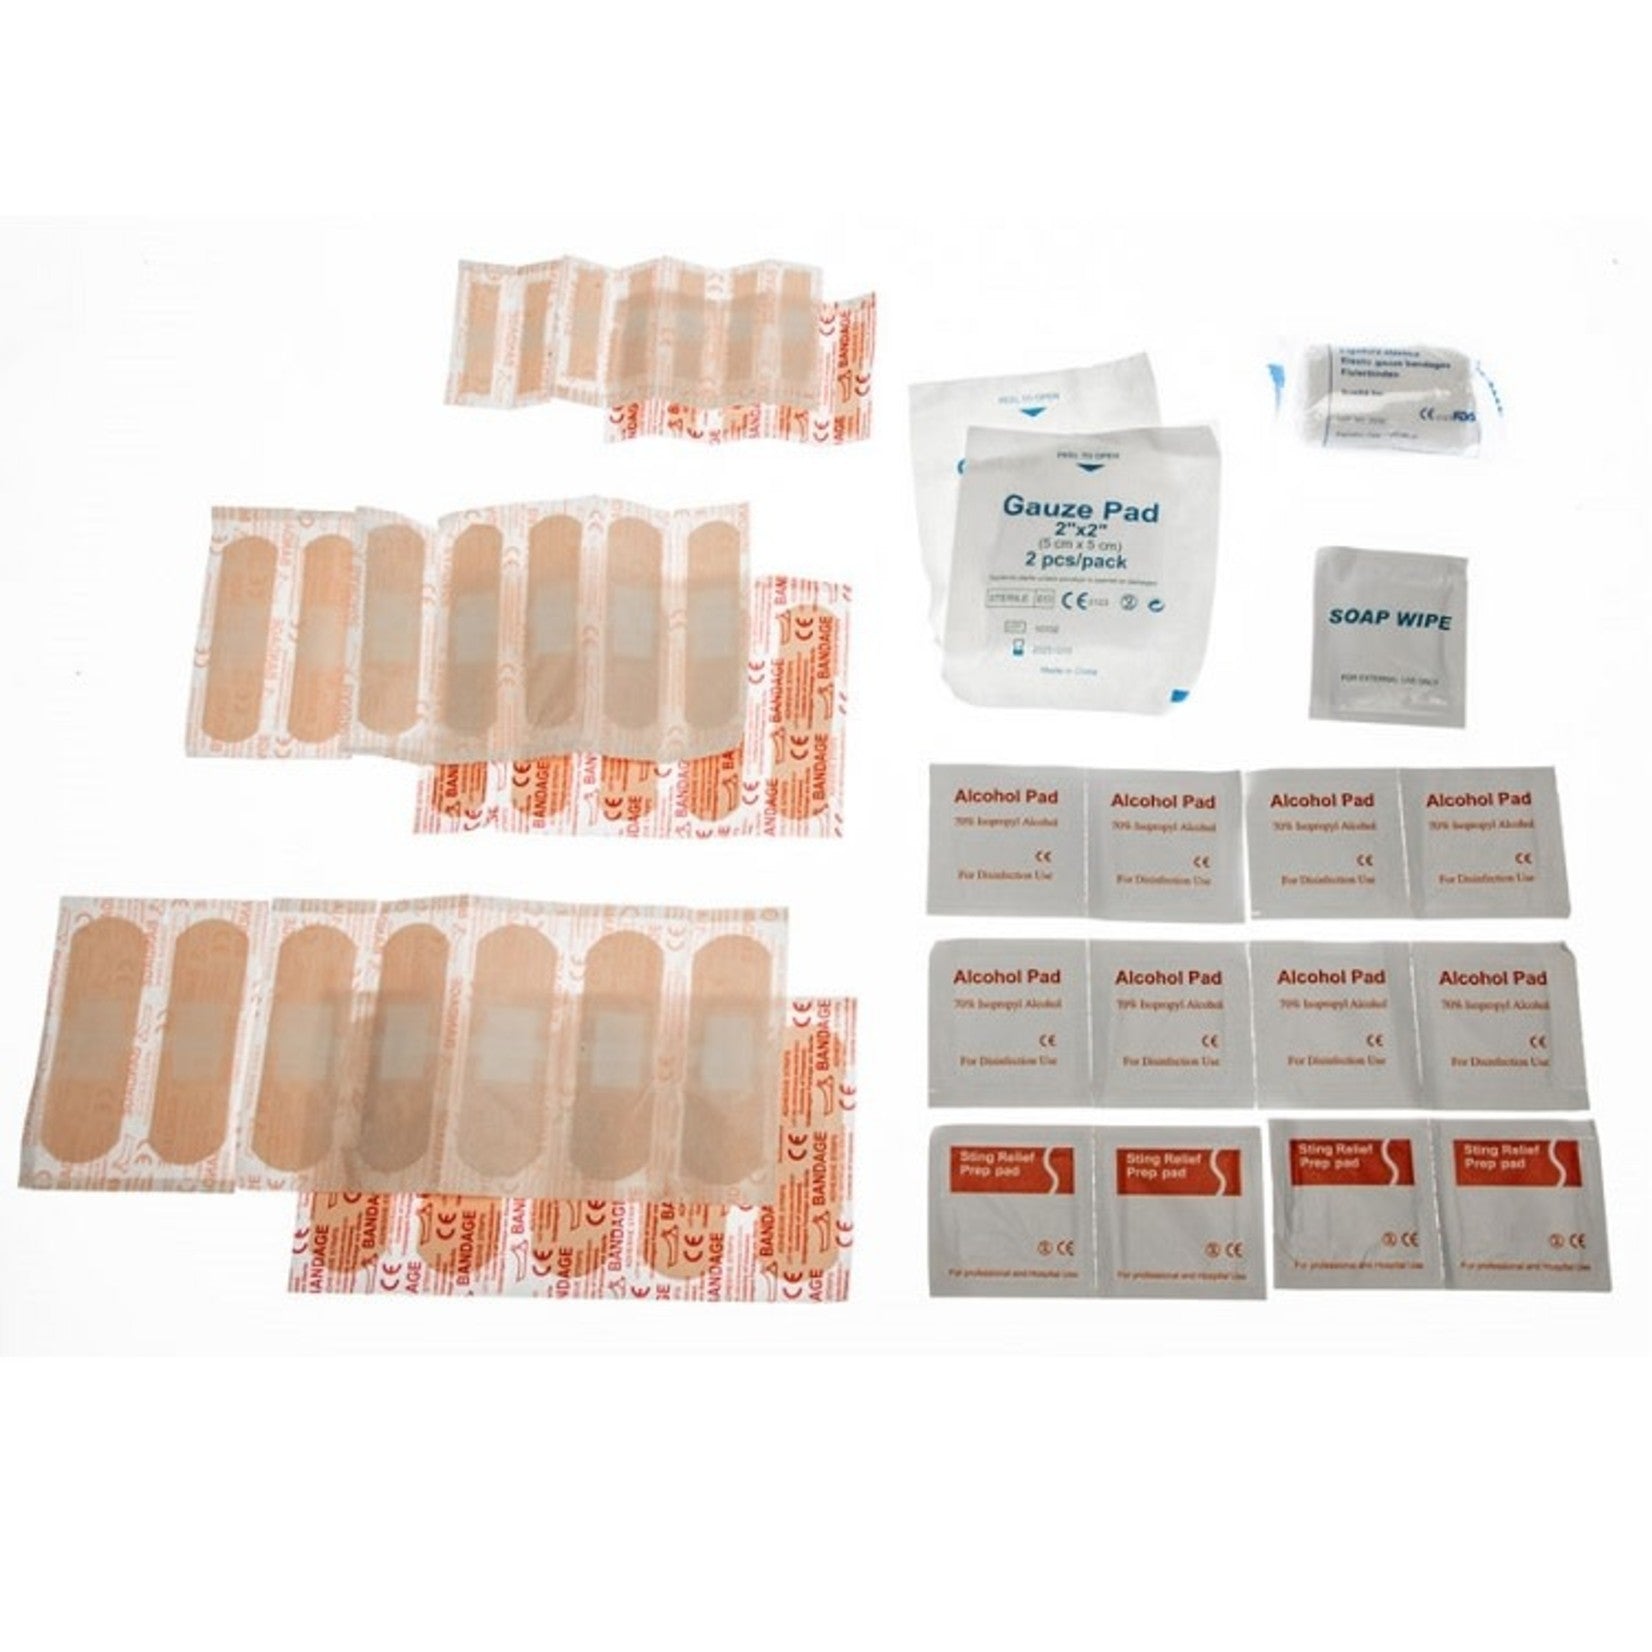 55 Piece Travel First Aid Kit in Reusable Bag